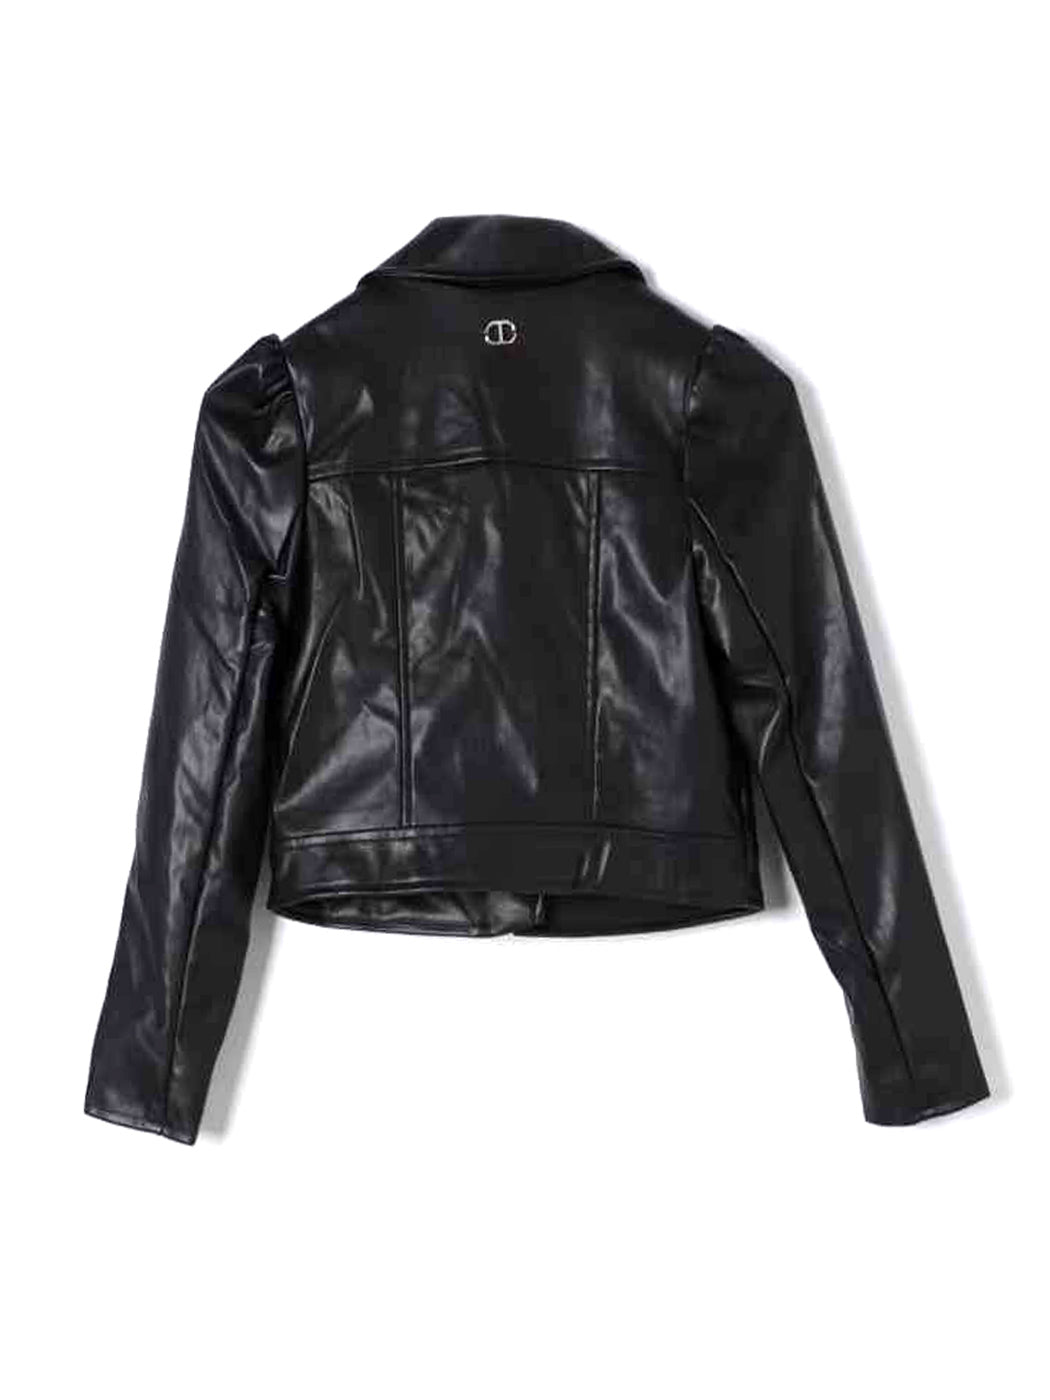 Twinset faux leather jacket for Girls